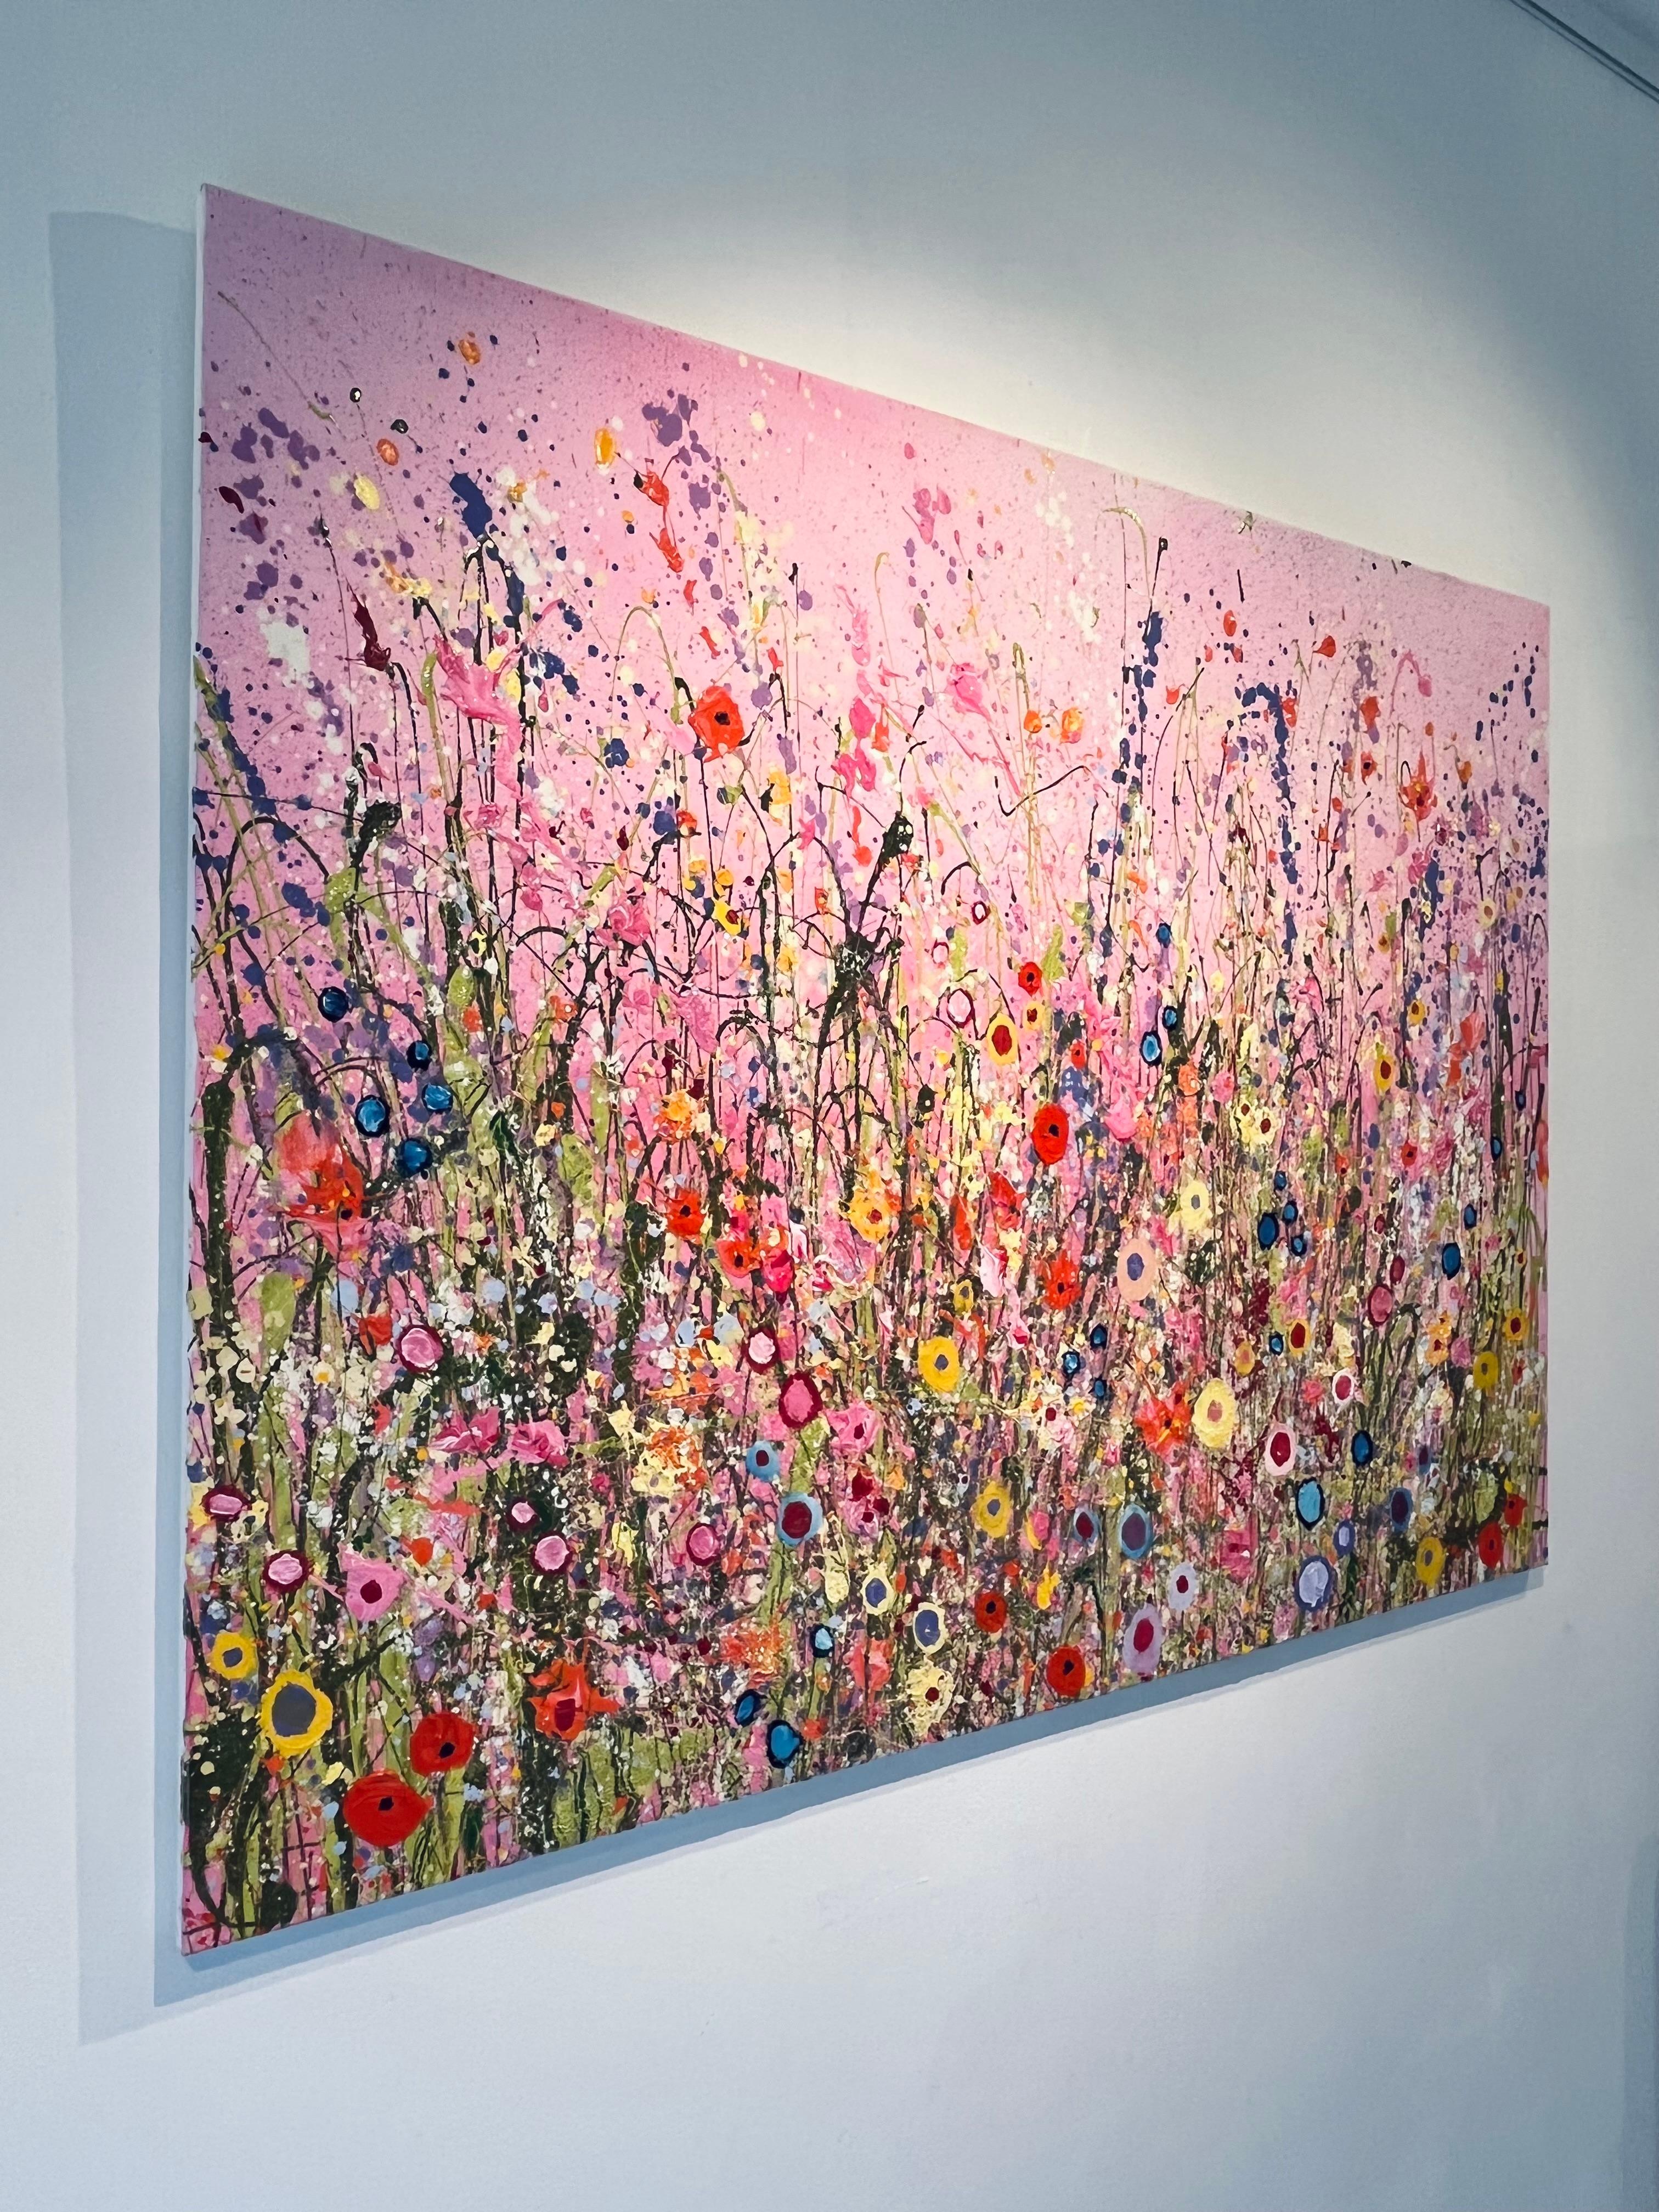 This is Where all the Magic Happens-original floral abstract painting-modern art - Naturalistic Painting by Yvonne Coomber